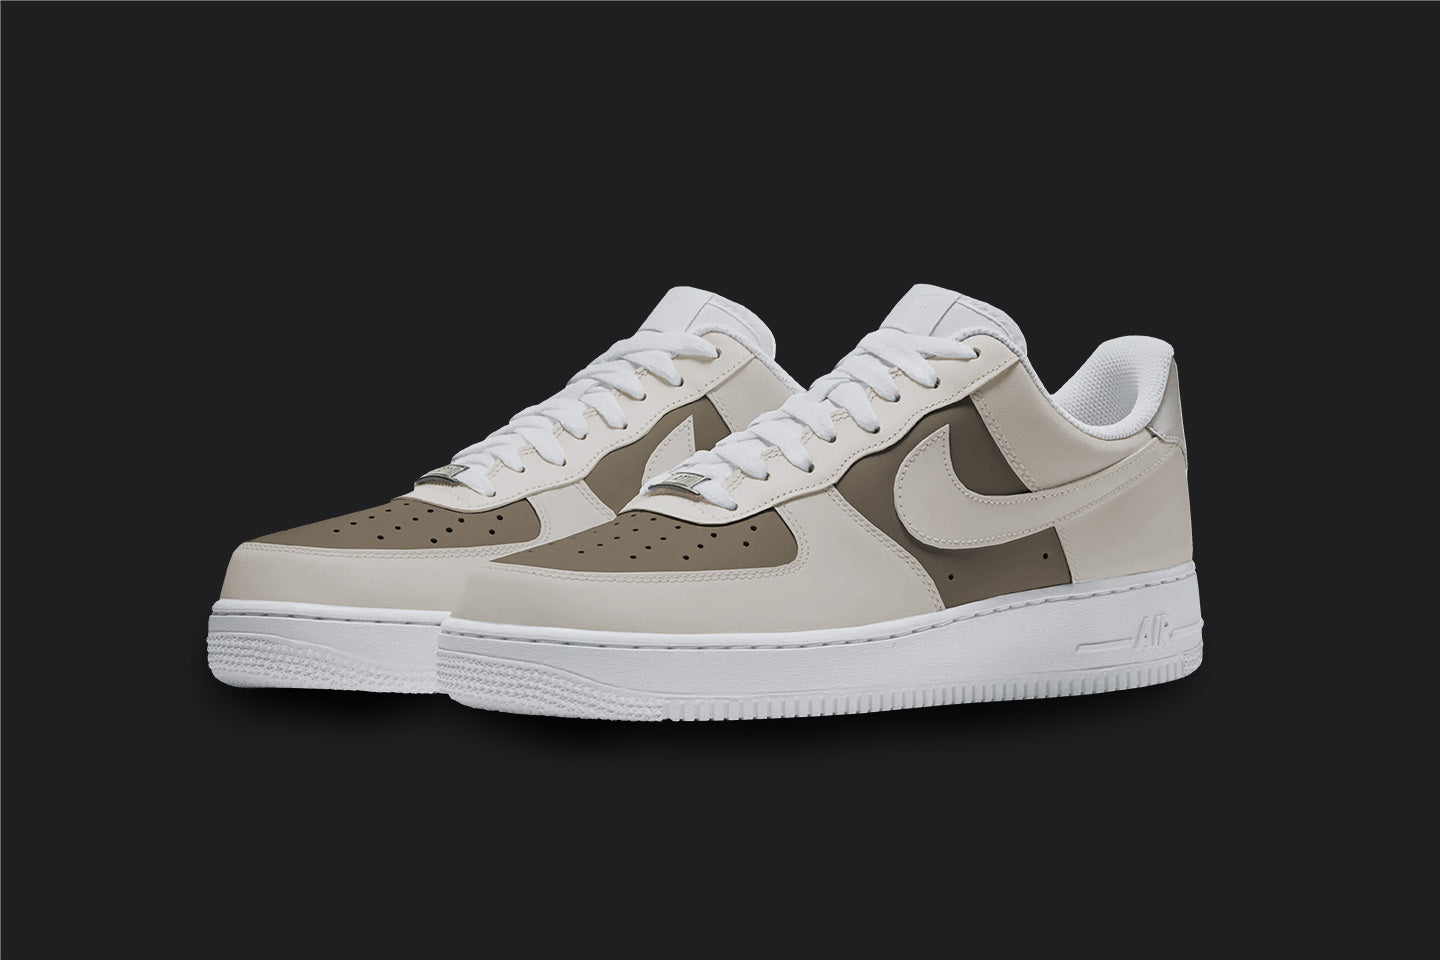 The image is of a Custom Nike Air force 1 sneaker pair on a blank black background. The custom sneakers are painted in beige and brown colors. 